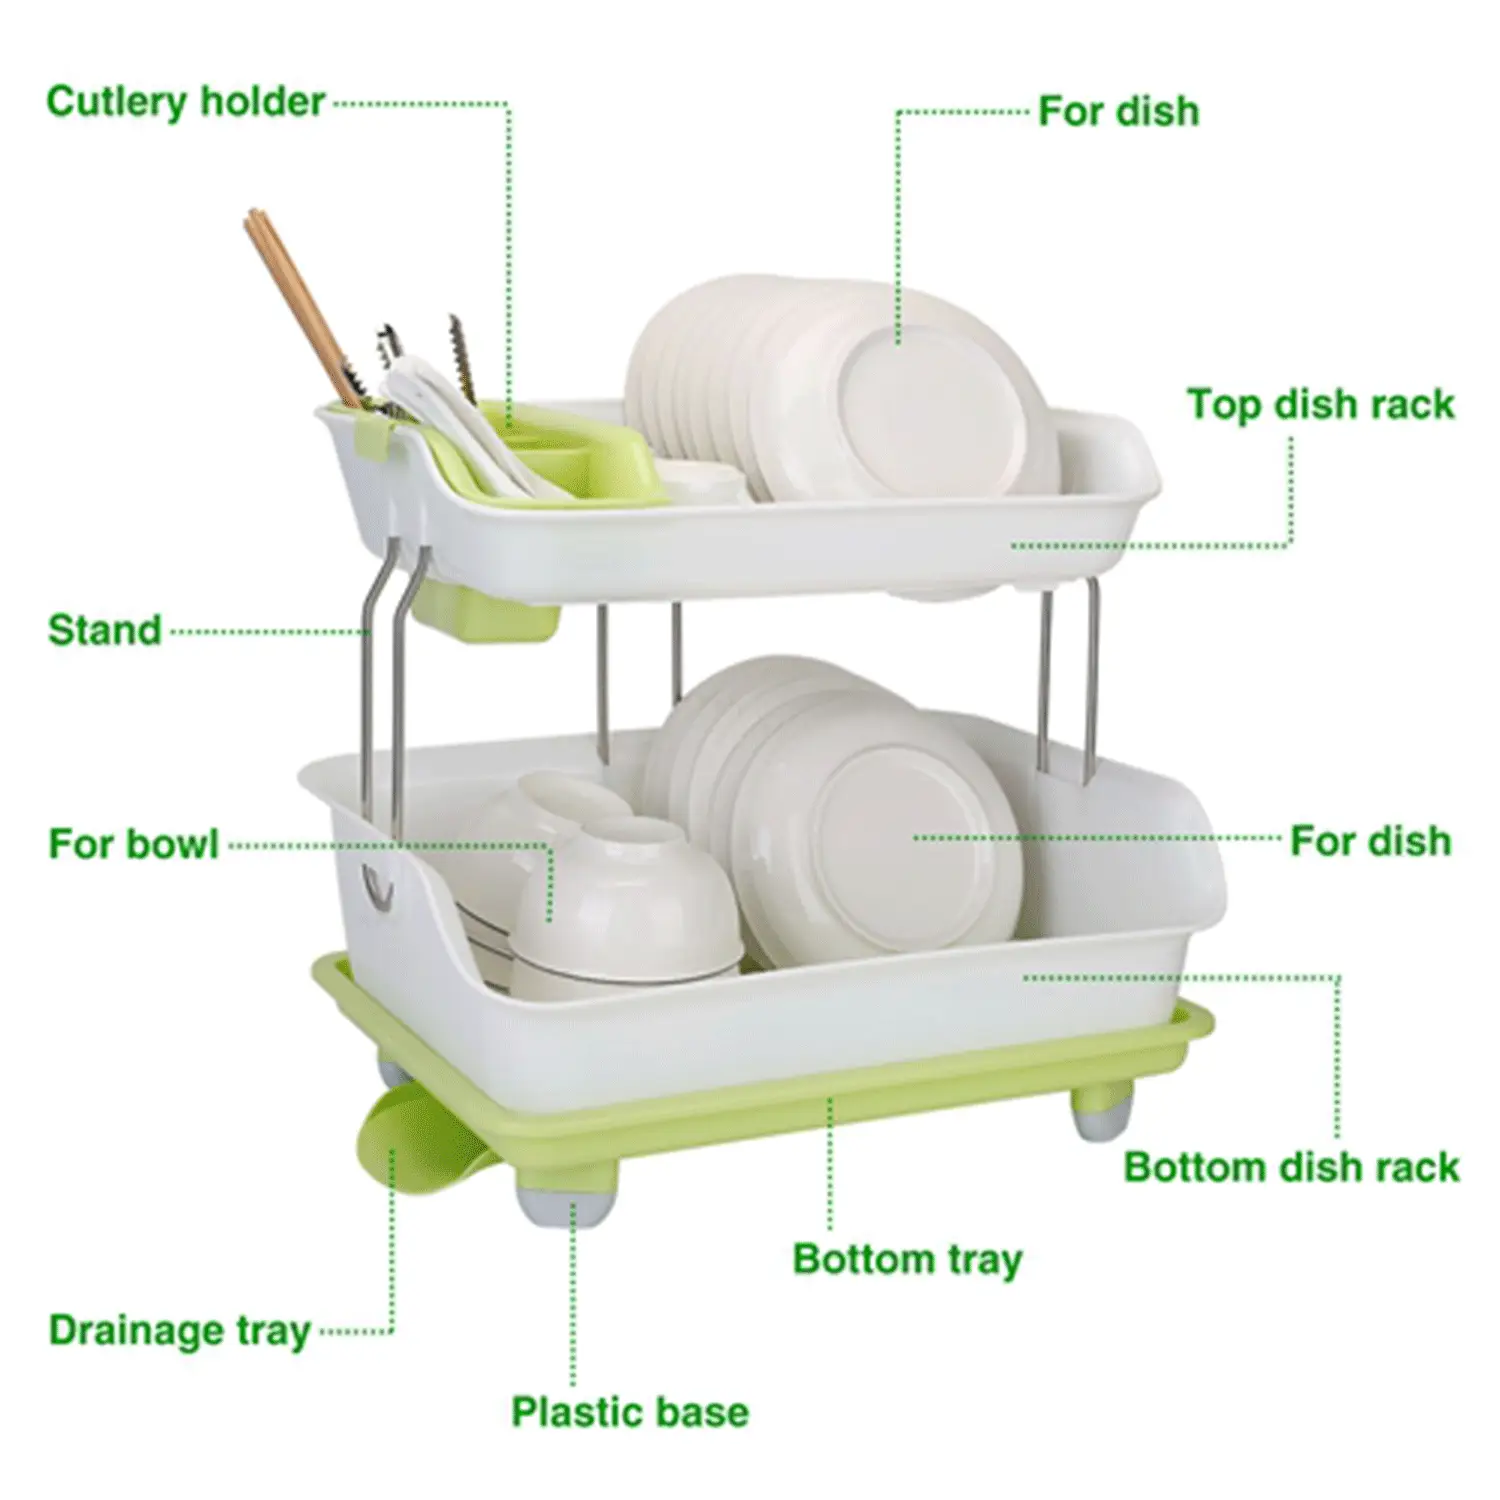 2-Tier Dish-Drying Rack, Cutlery Holder, Drainage Tray